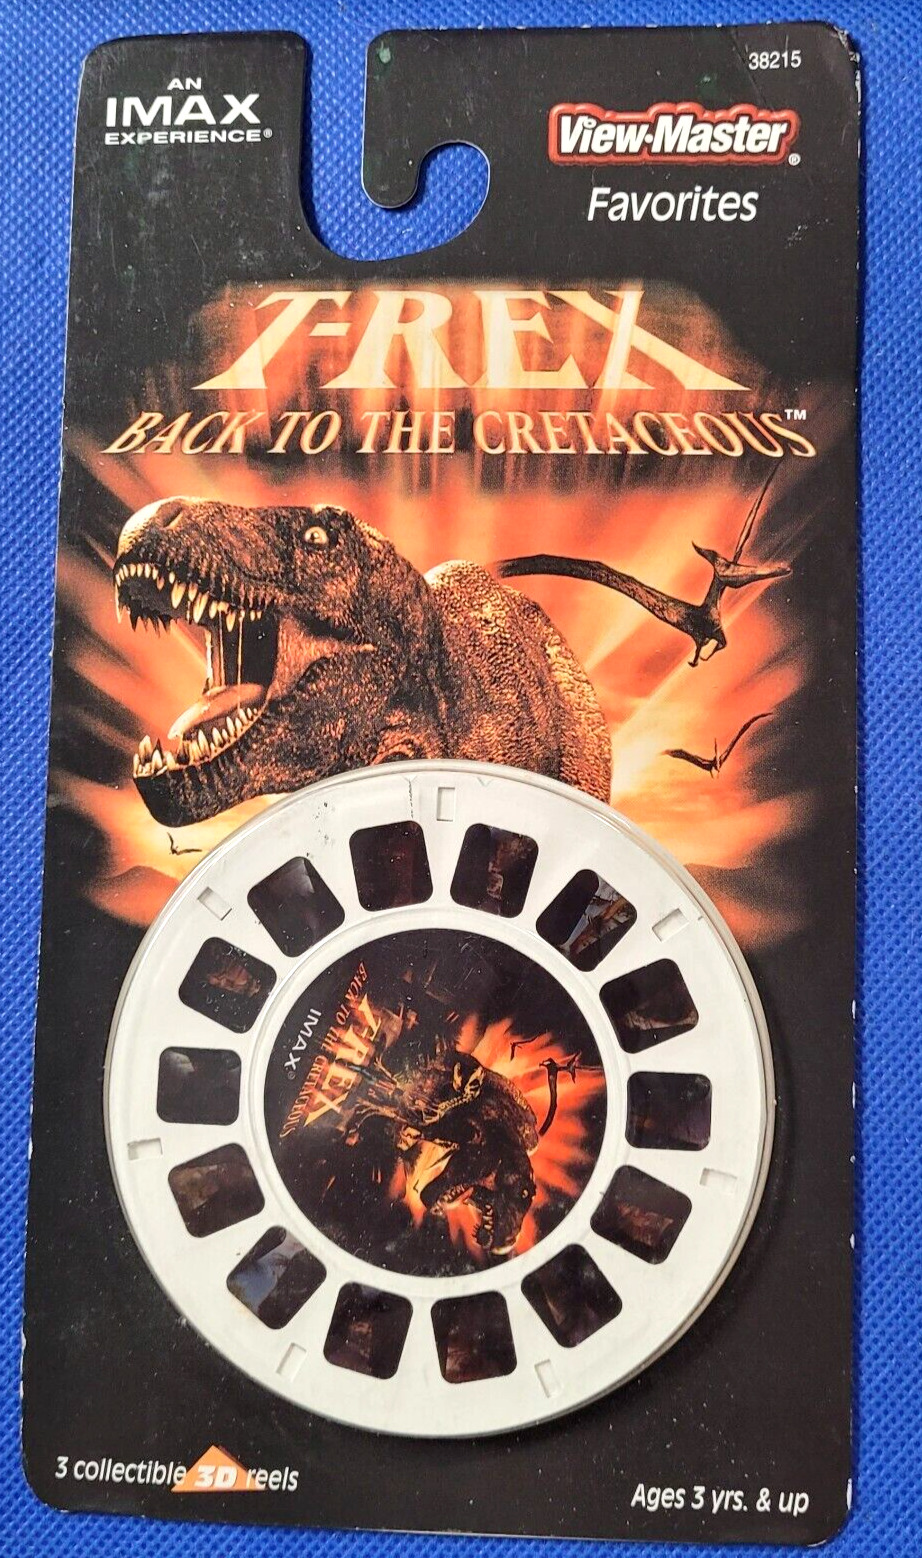 SEALED IMAX T-REX Back to the Cretaceous Dinosaurs view-master 3 Reels Pack NOS